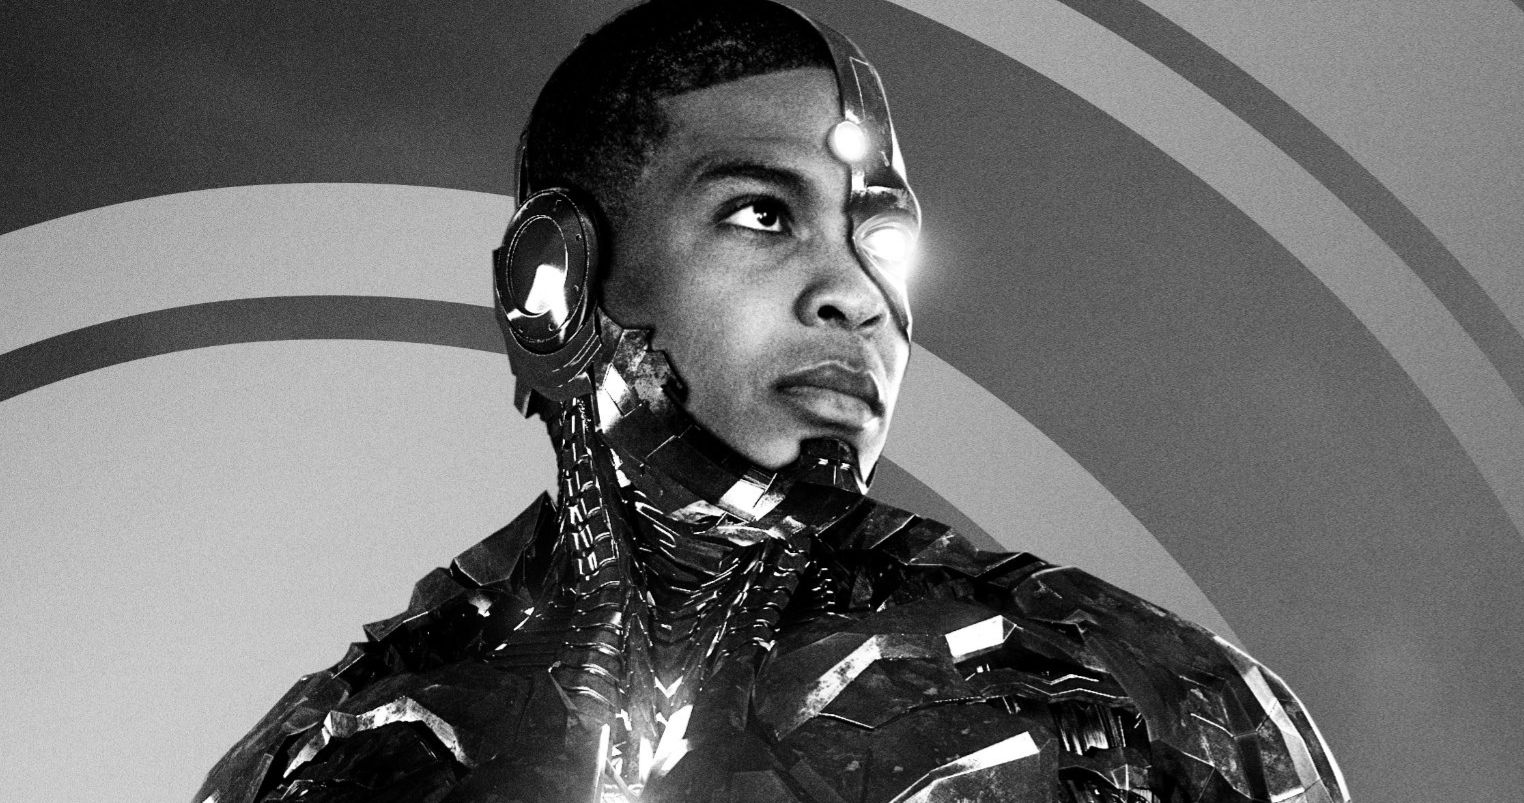 Cyborg Is Not Alone in New Snyder Cut Teaser Featuring the Return of Ray Fisher